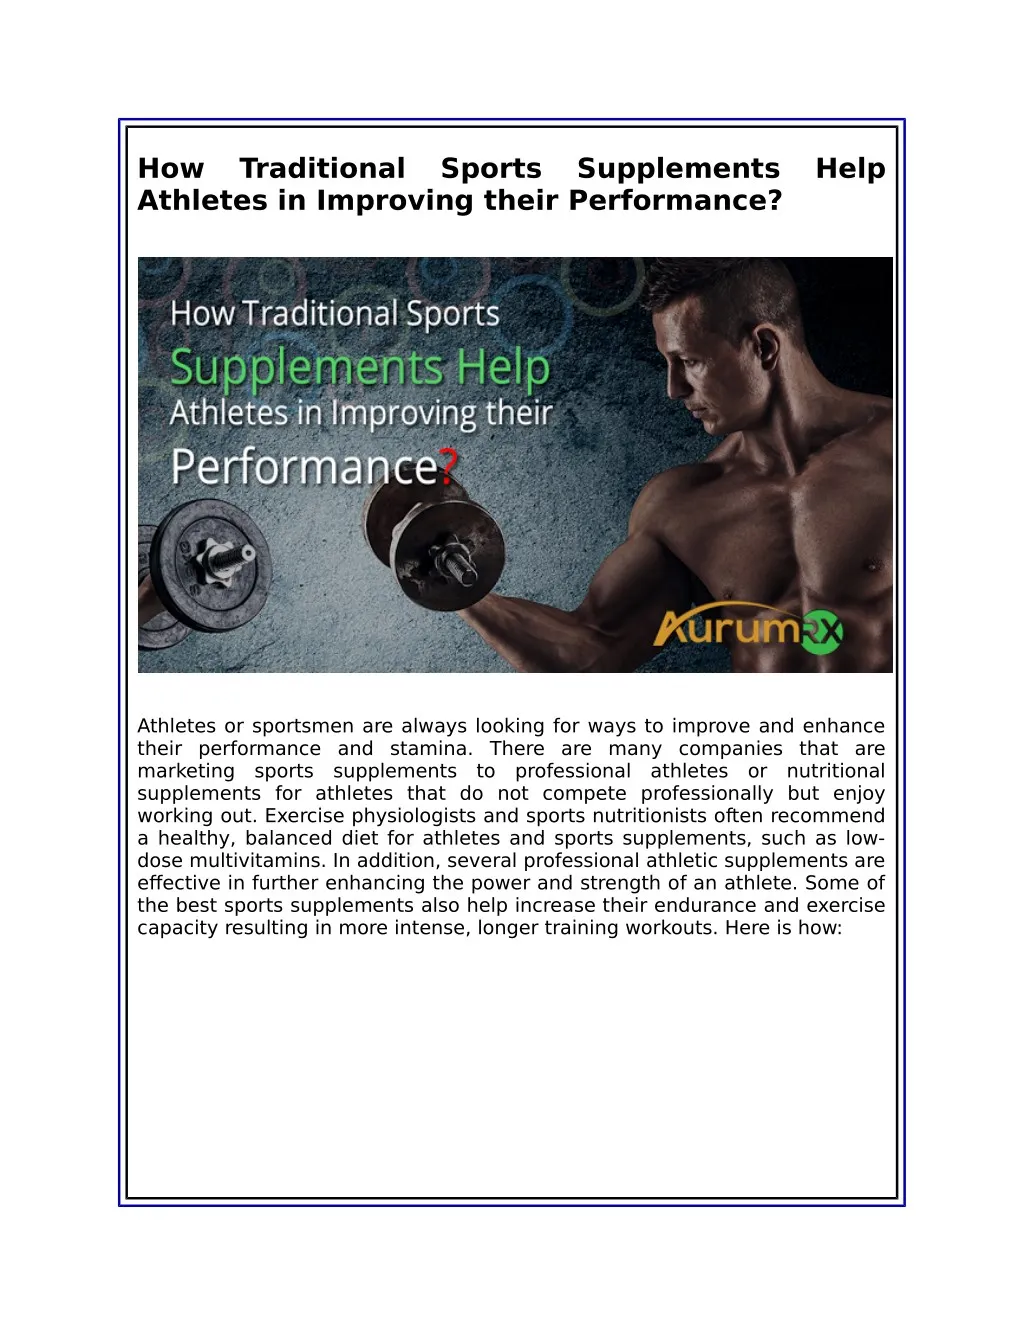 how traditional sports supplements help athletes